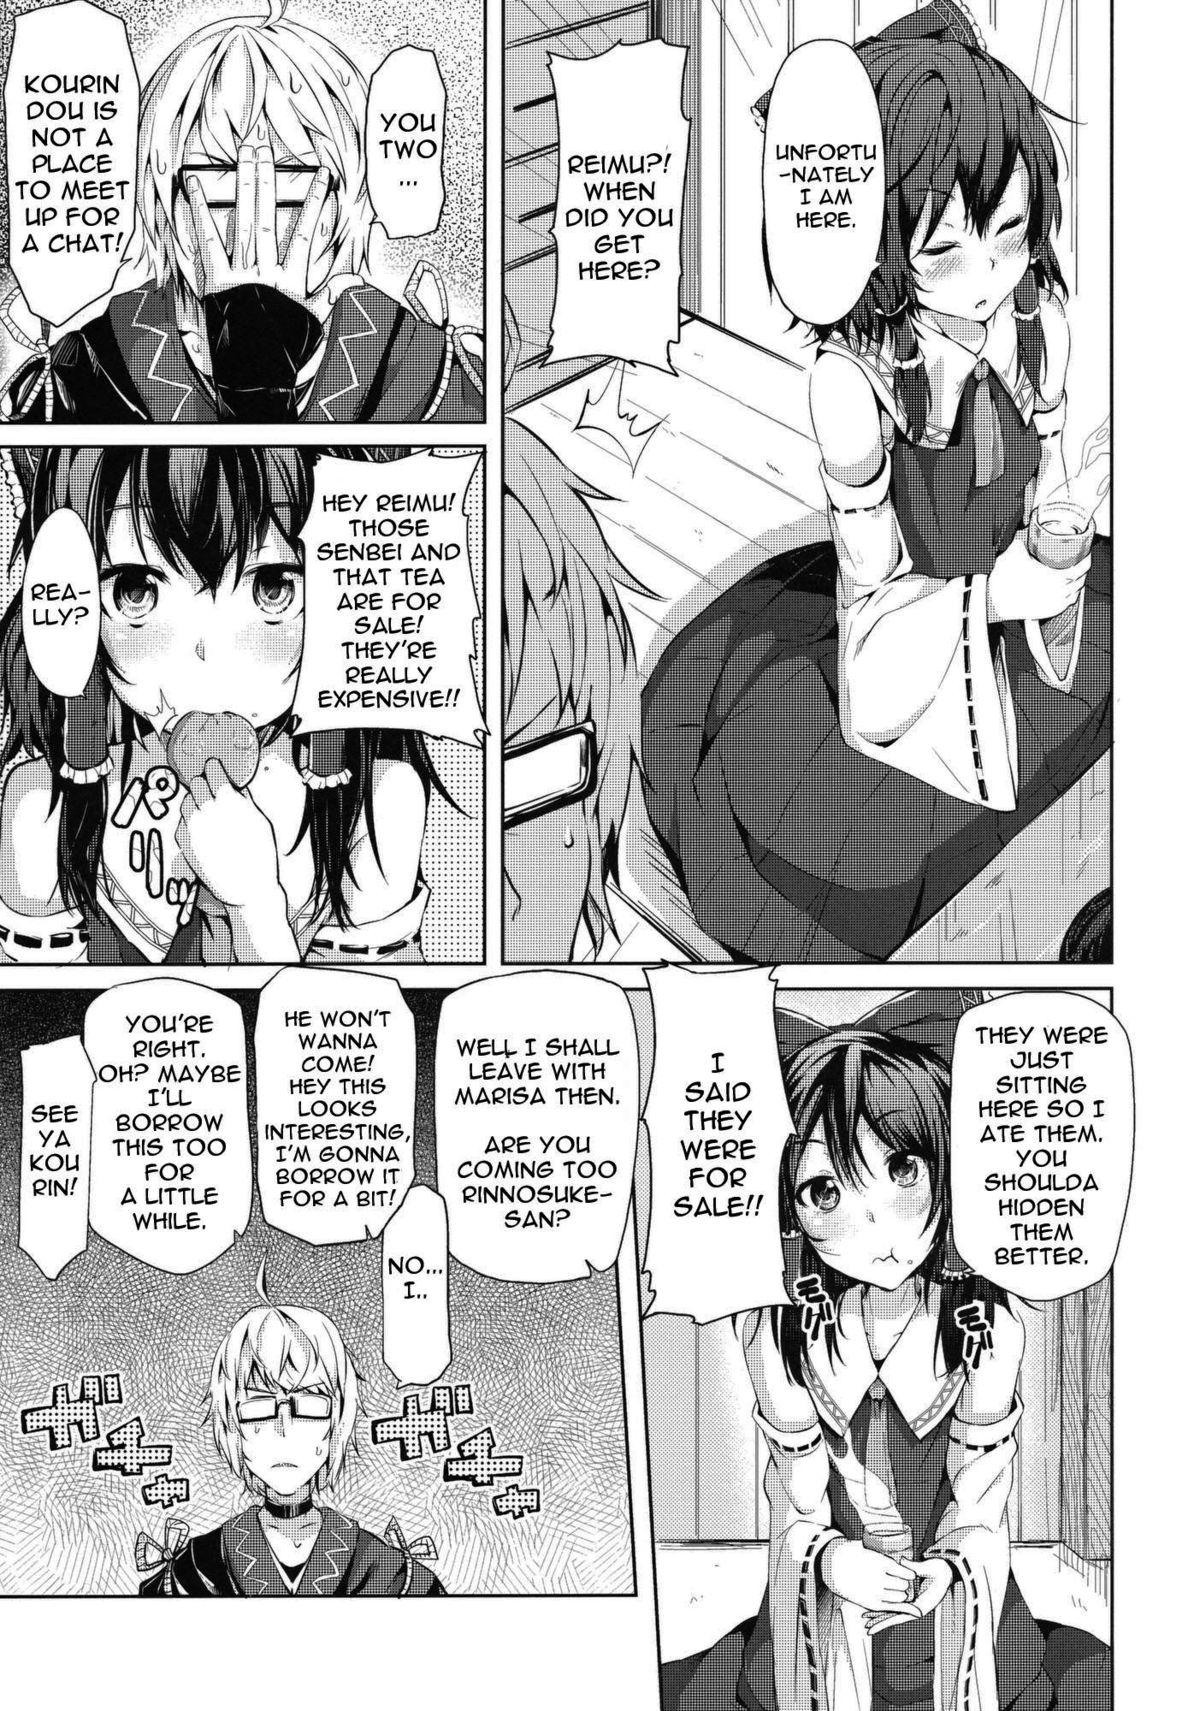 Ball Licking Zutto Kourin no Turn! Turn 1 me | It's Always Kourin's Turn - First Turn - Touhou project Massage - Page 6